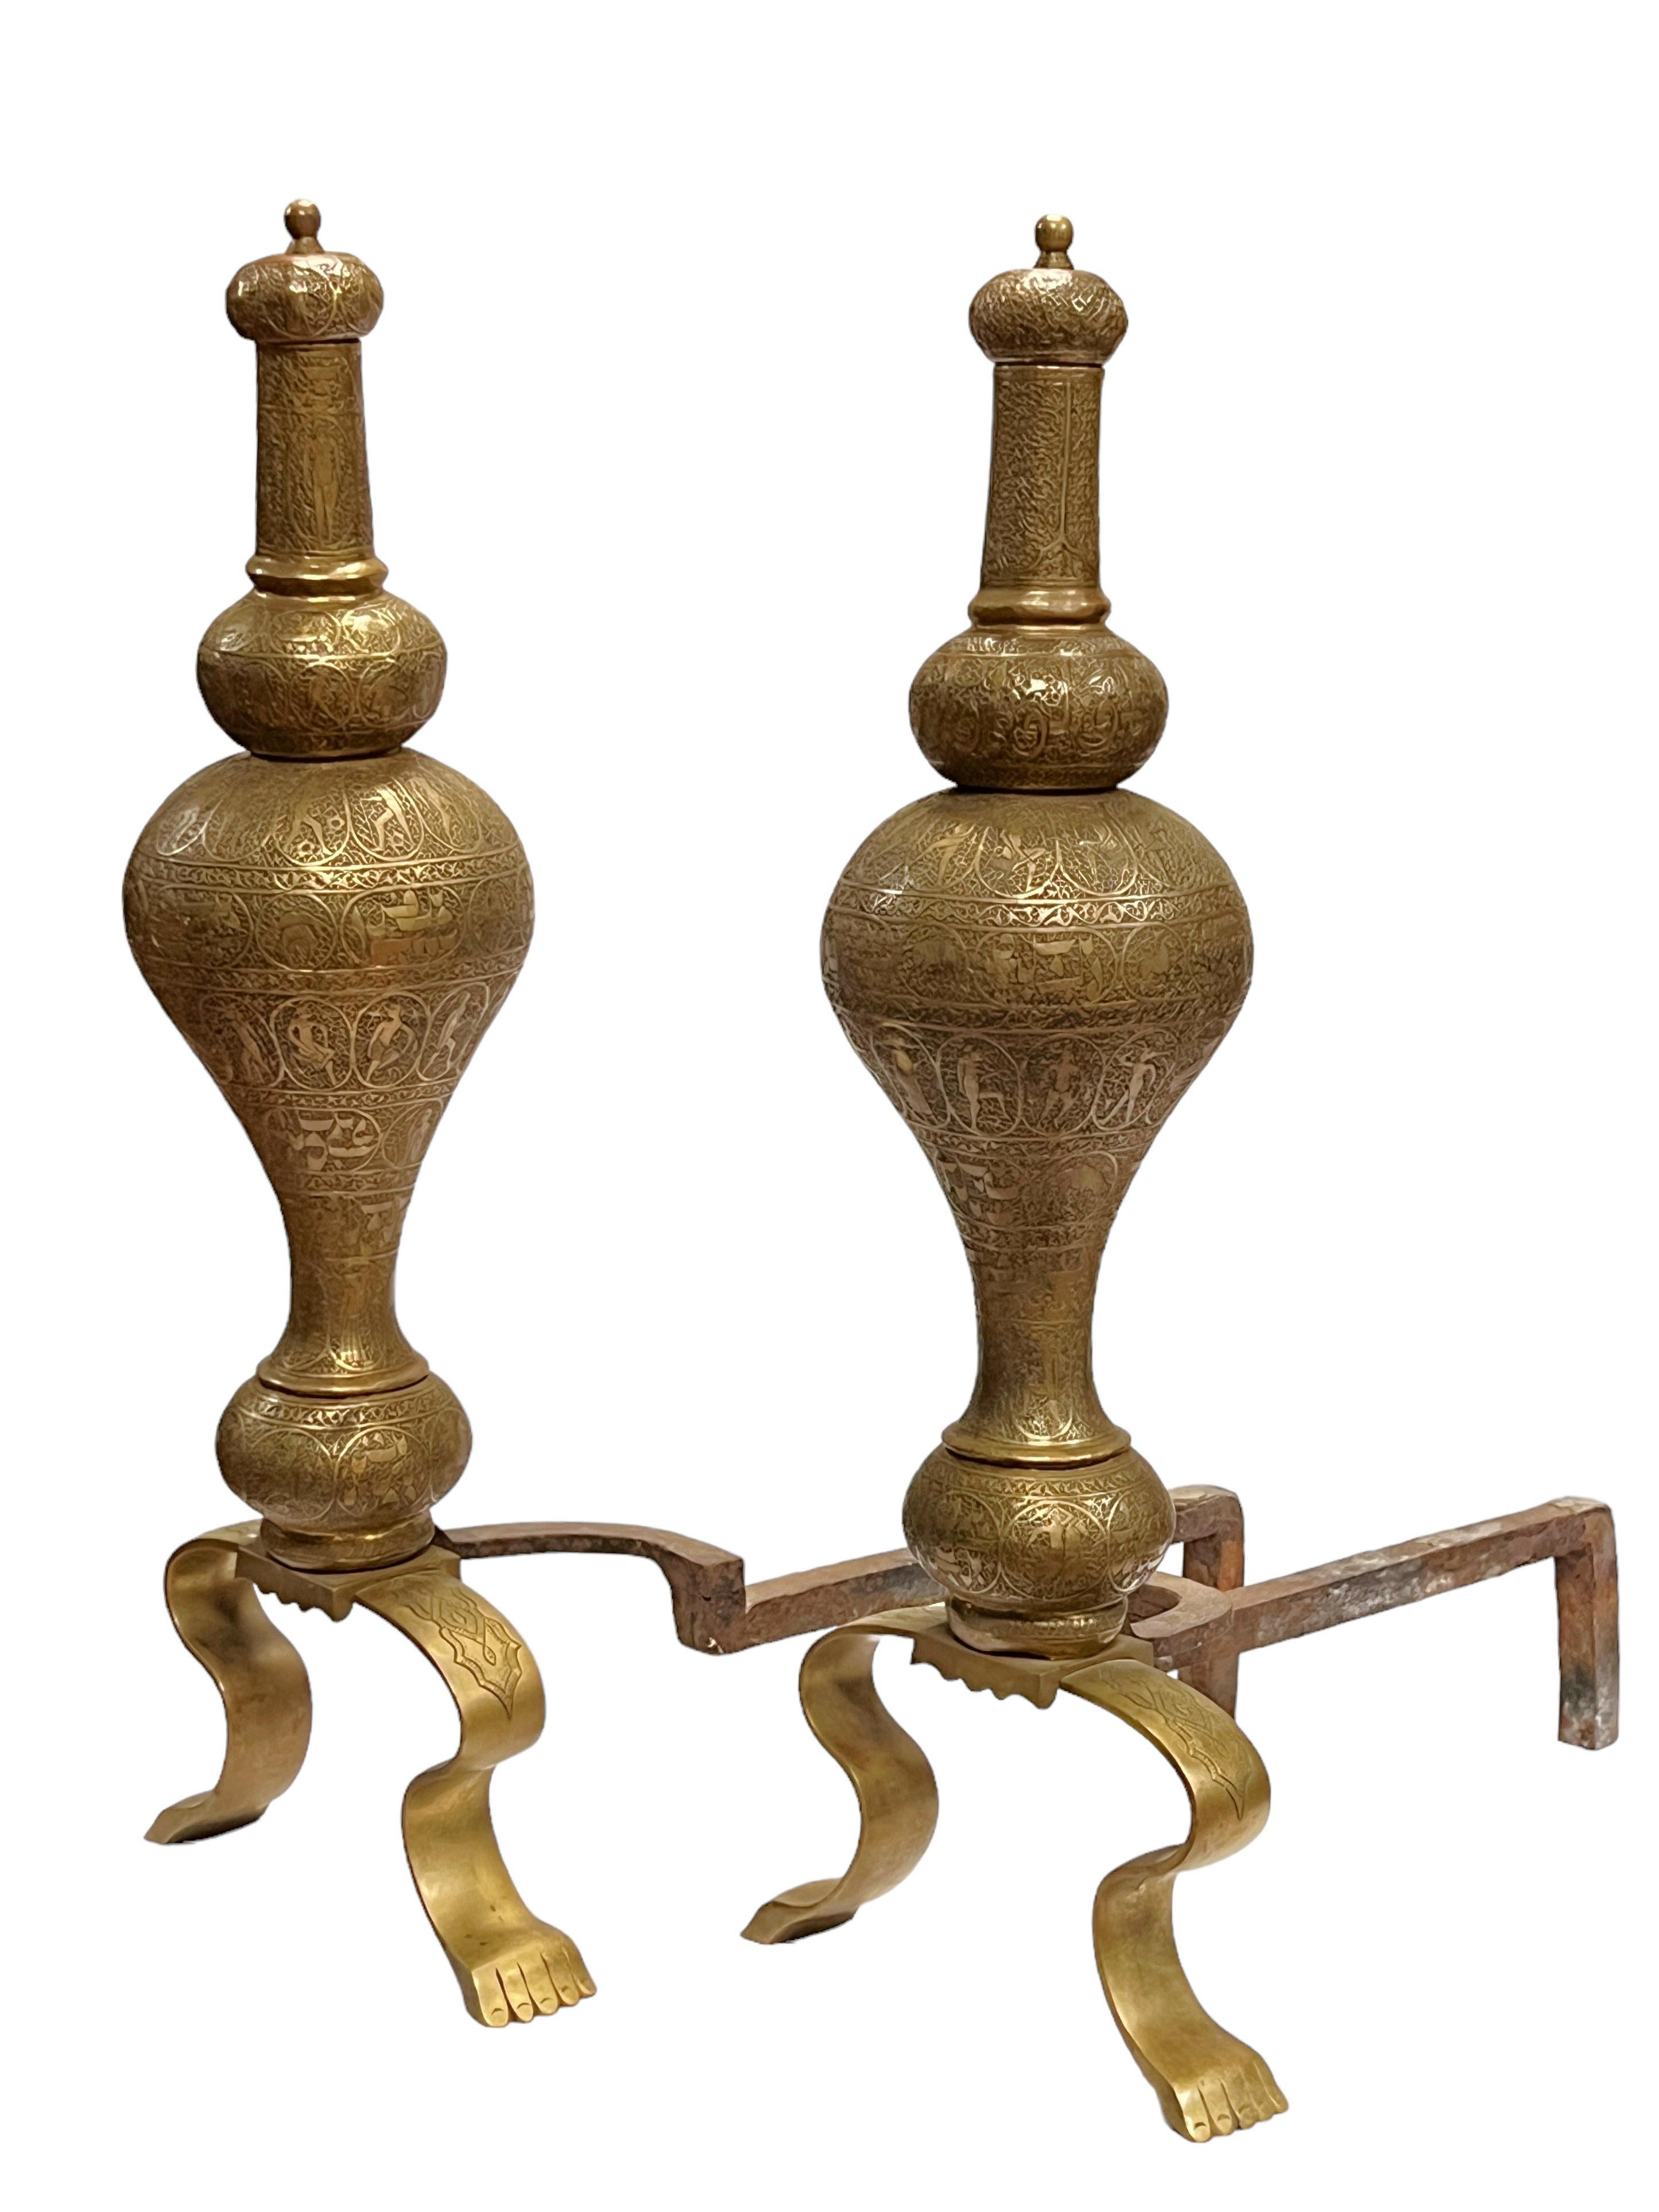 Very unique antique (late 19th century) bronze andirons depicting figures, animals and Islamic calligraphy.